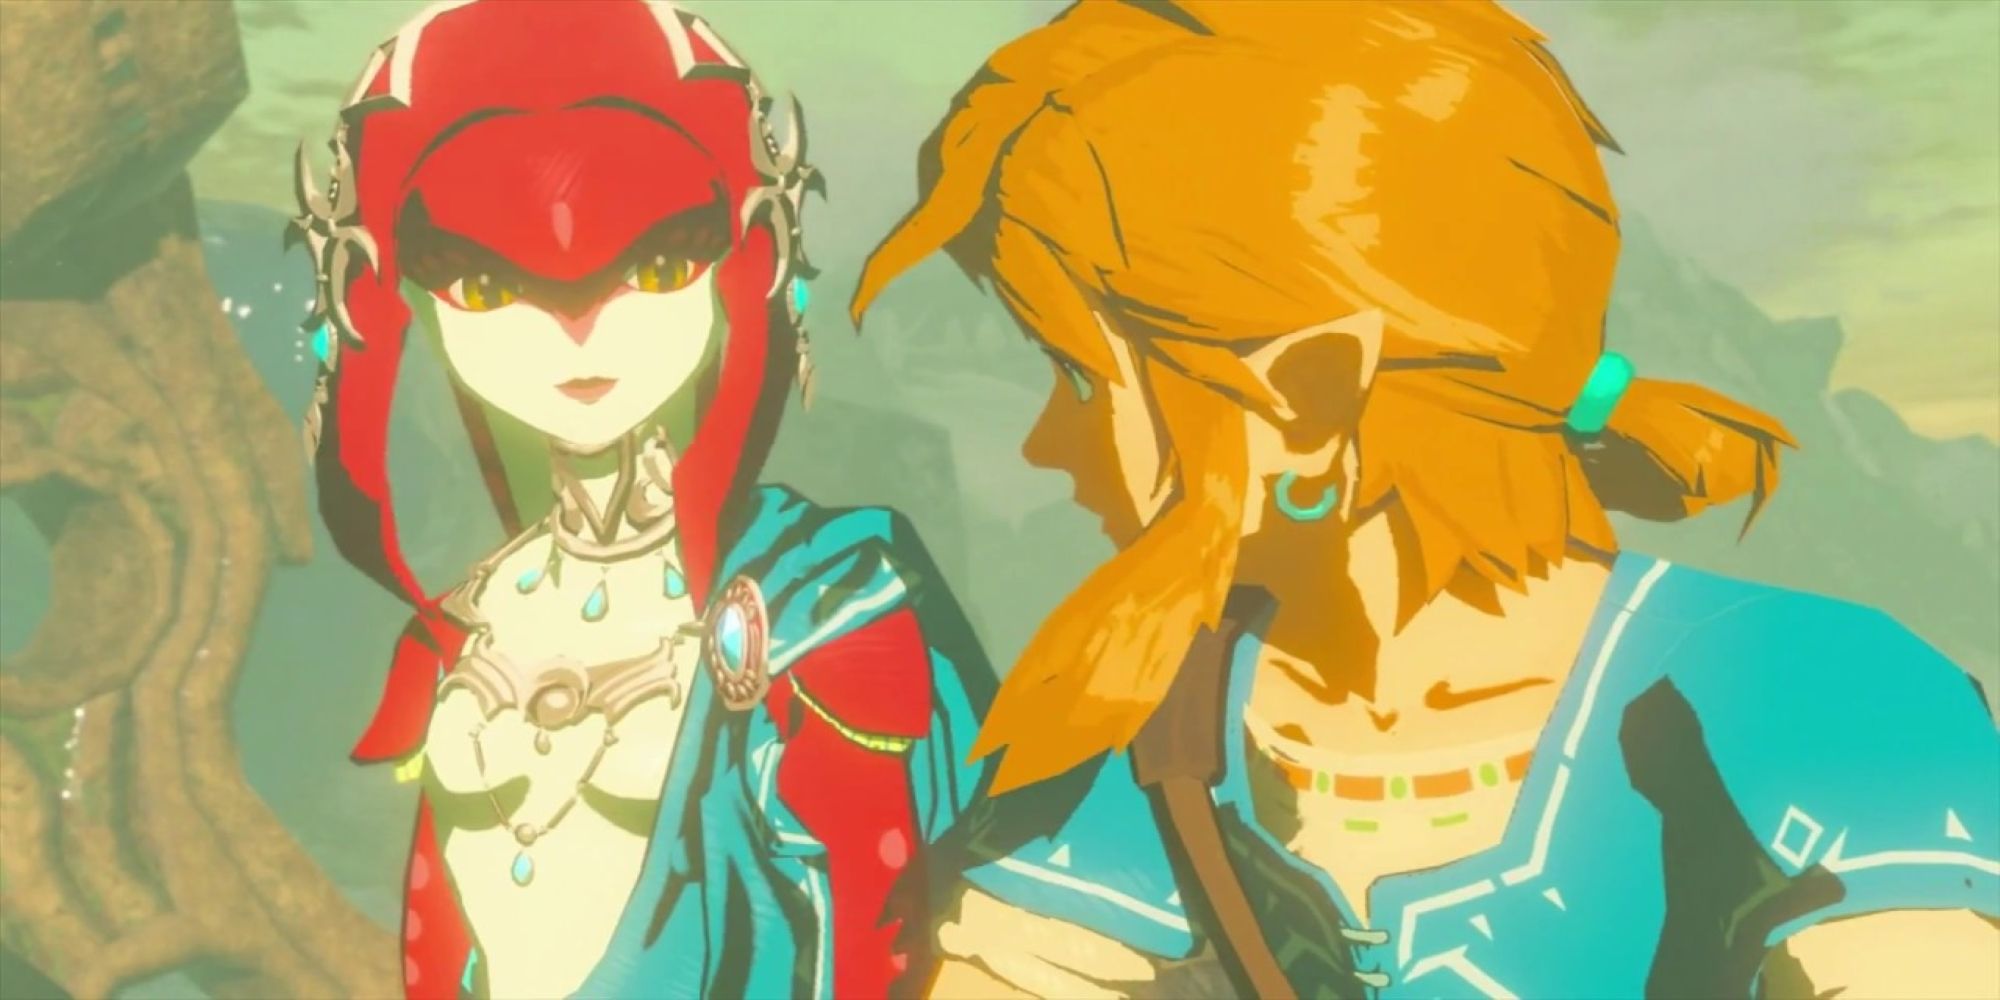 Mipha from The Legend of Zelda: Breath of the Wild reminisces fondly with Link.